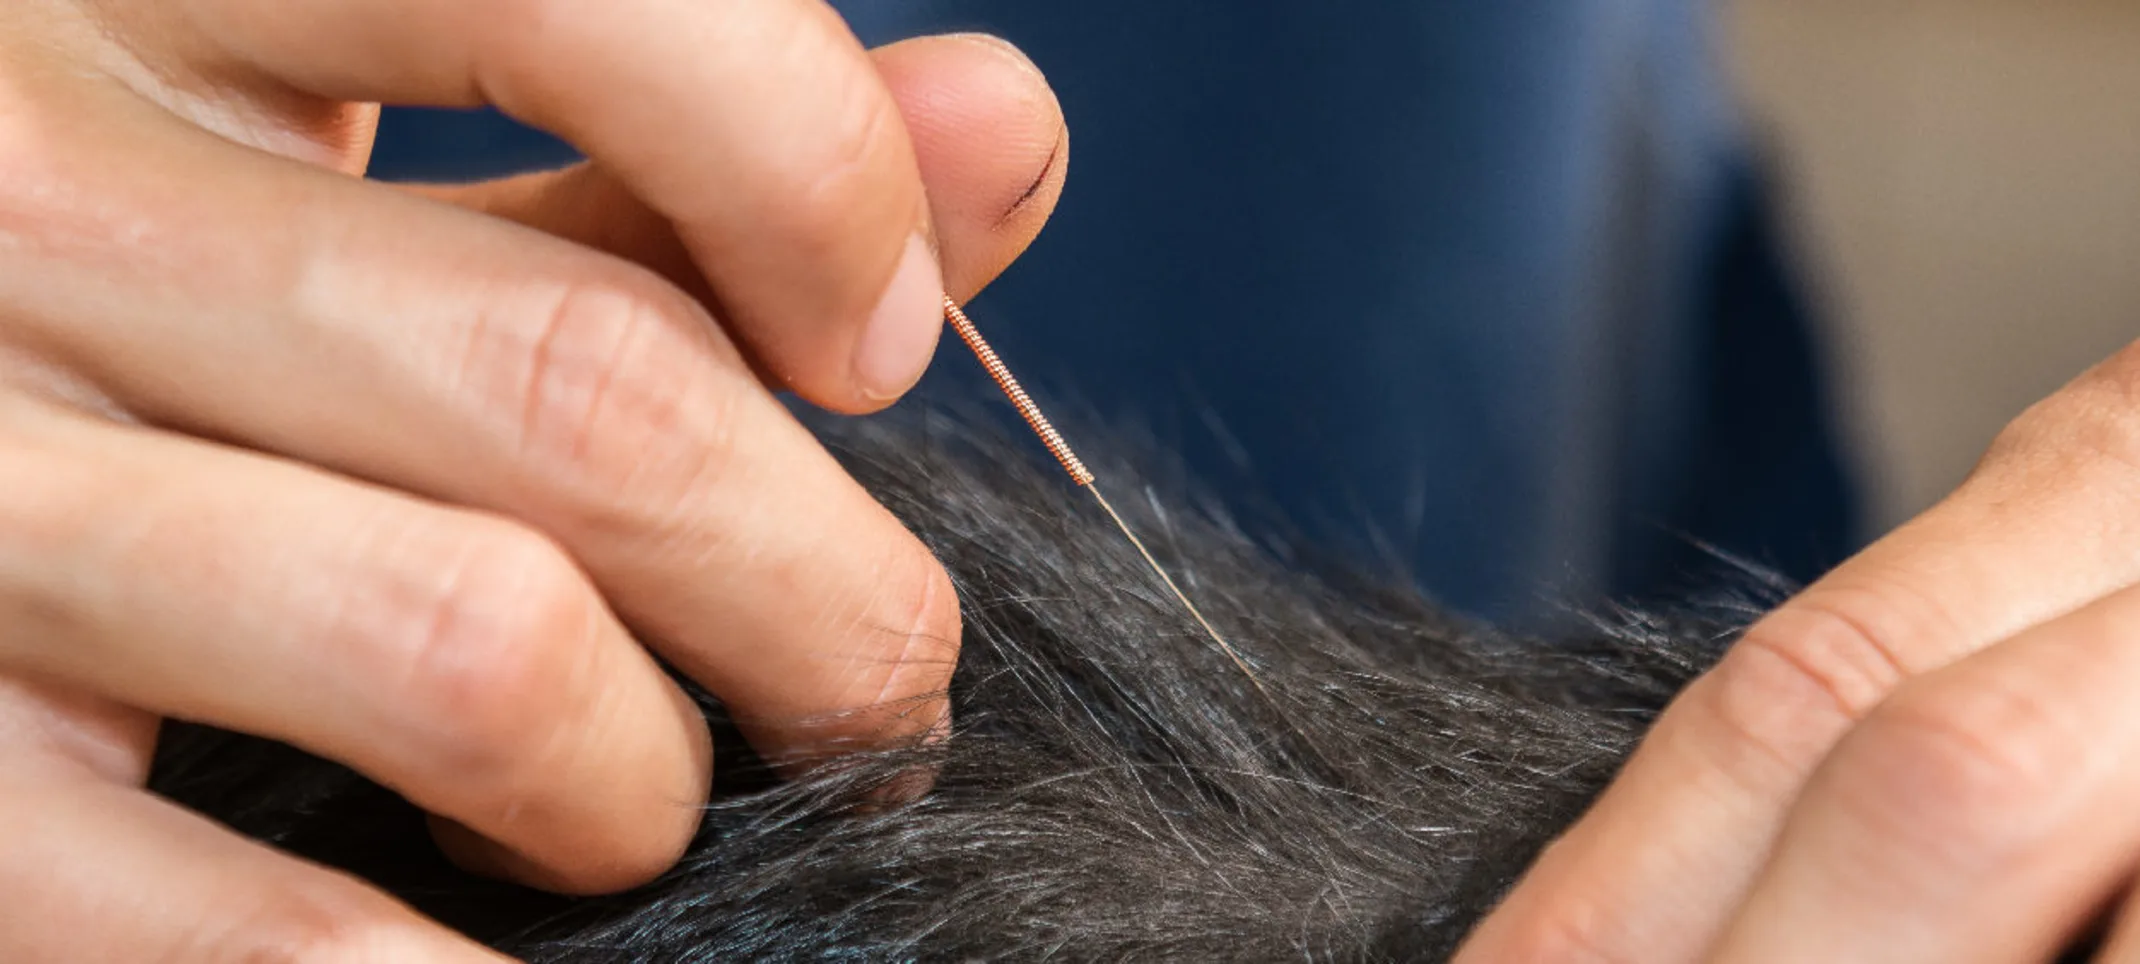 A close view of a veterinary professional performing acupuncture on a pet